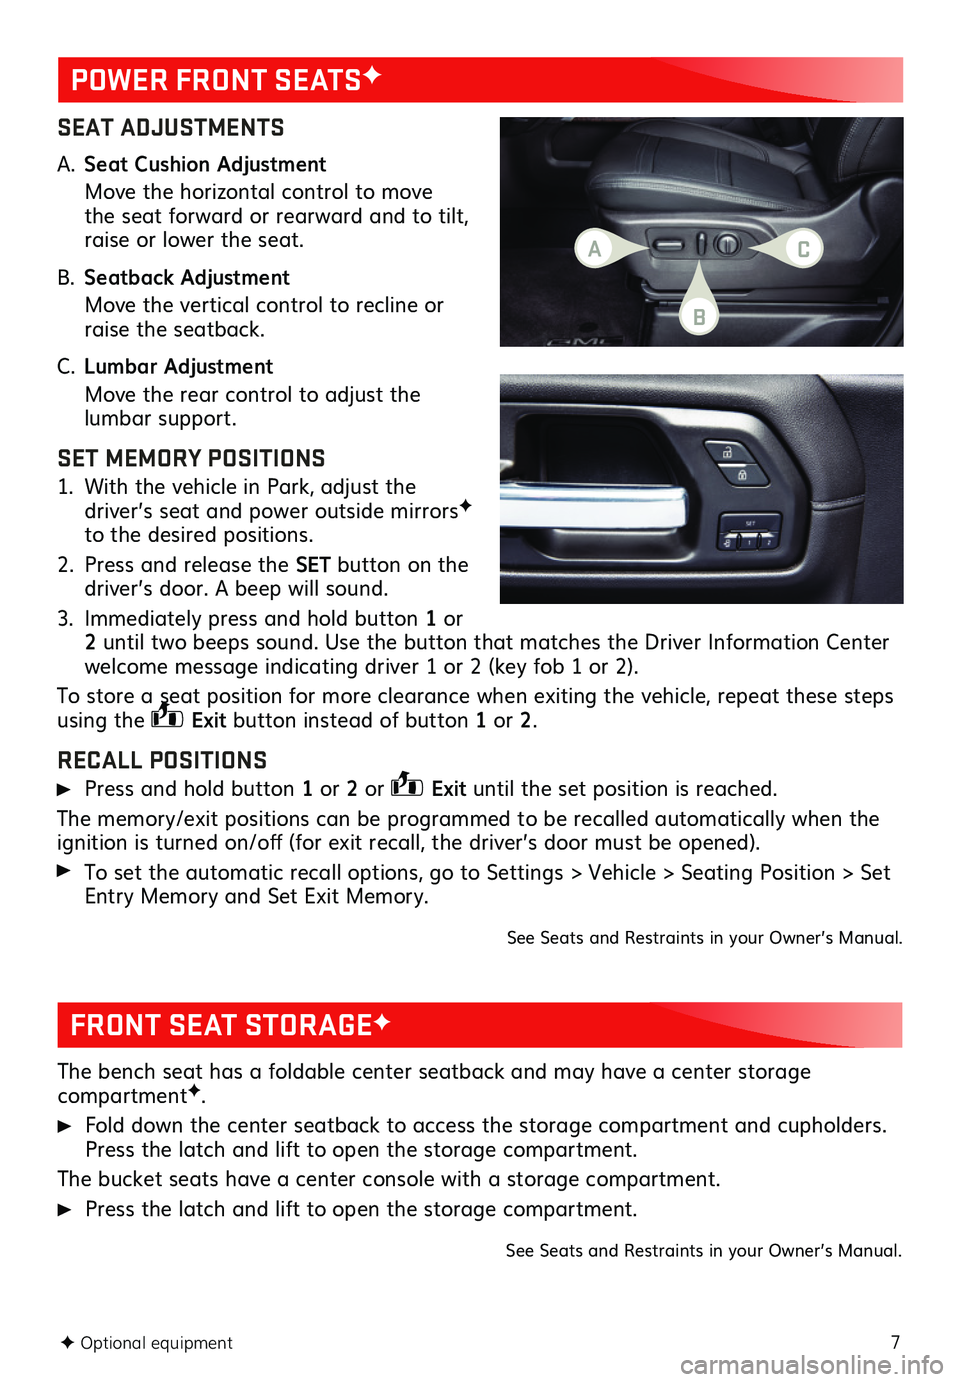 GMC SIERRA 2020  Get To Know Guide 7
SEAT ADJUSTMENTS
A. Seat Cushion Adjustment
  Move the horizontal control to move the seat forward or rearward and to tilt, raise or lower the seat.
B. Seatback Adjustment
  Move the vertical contro